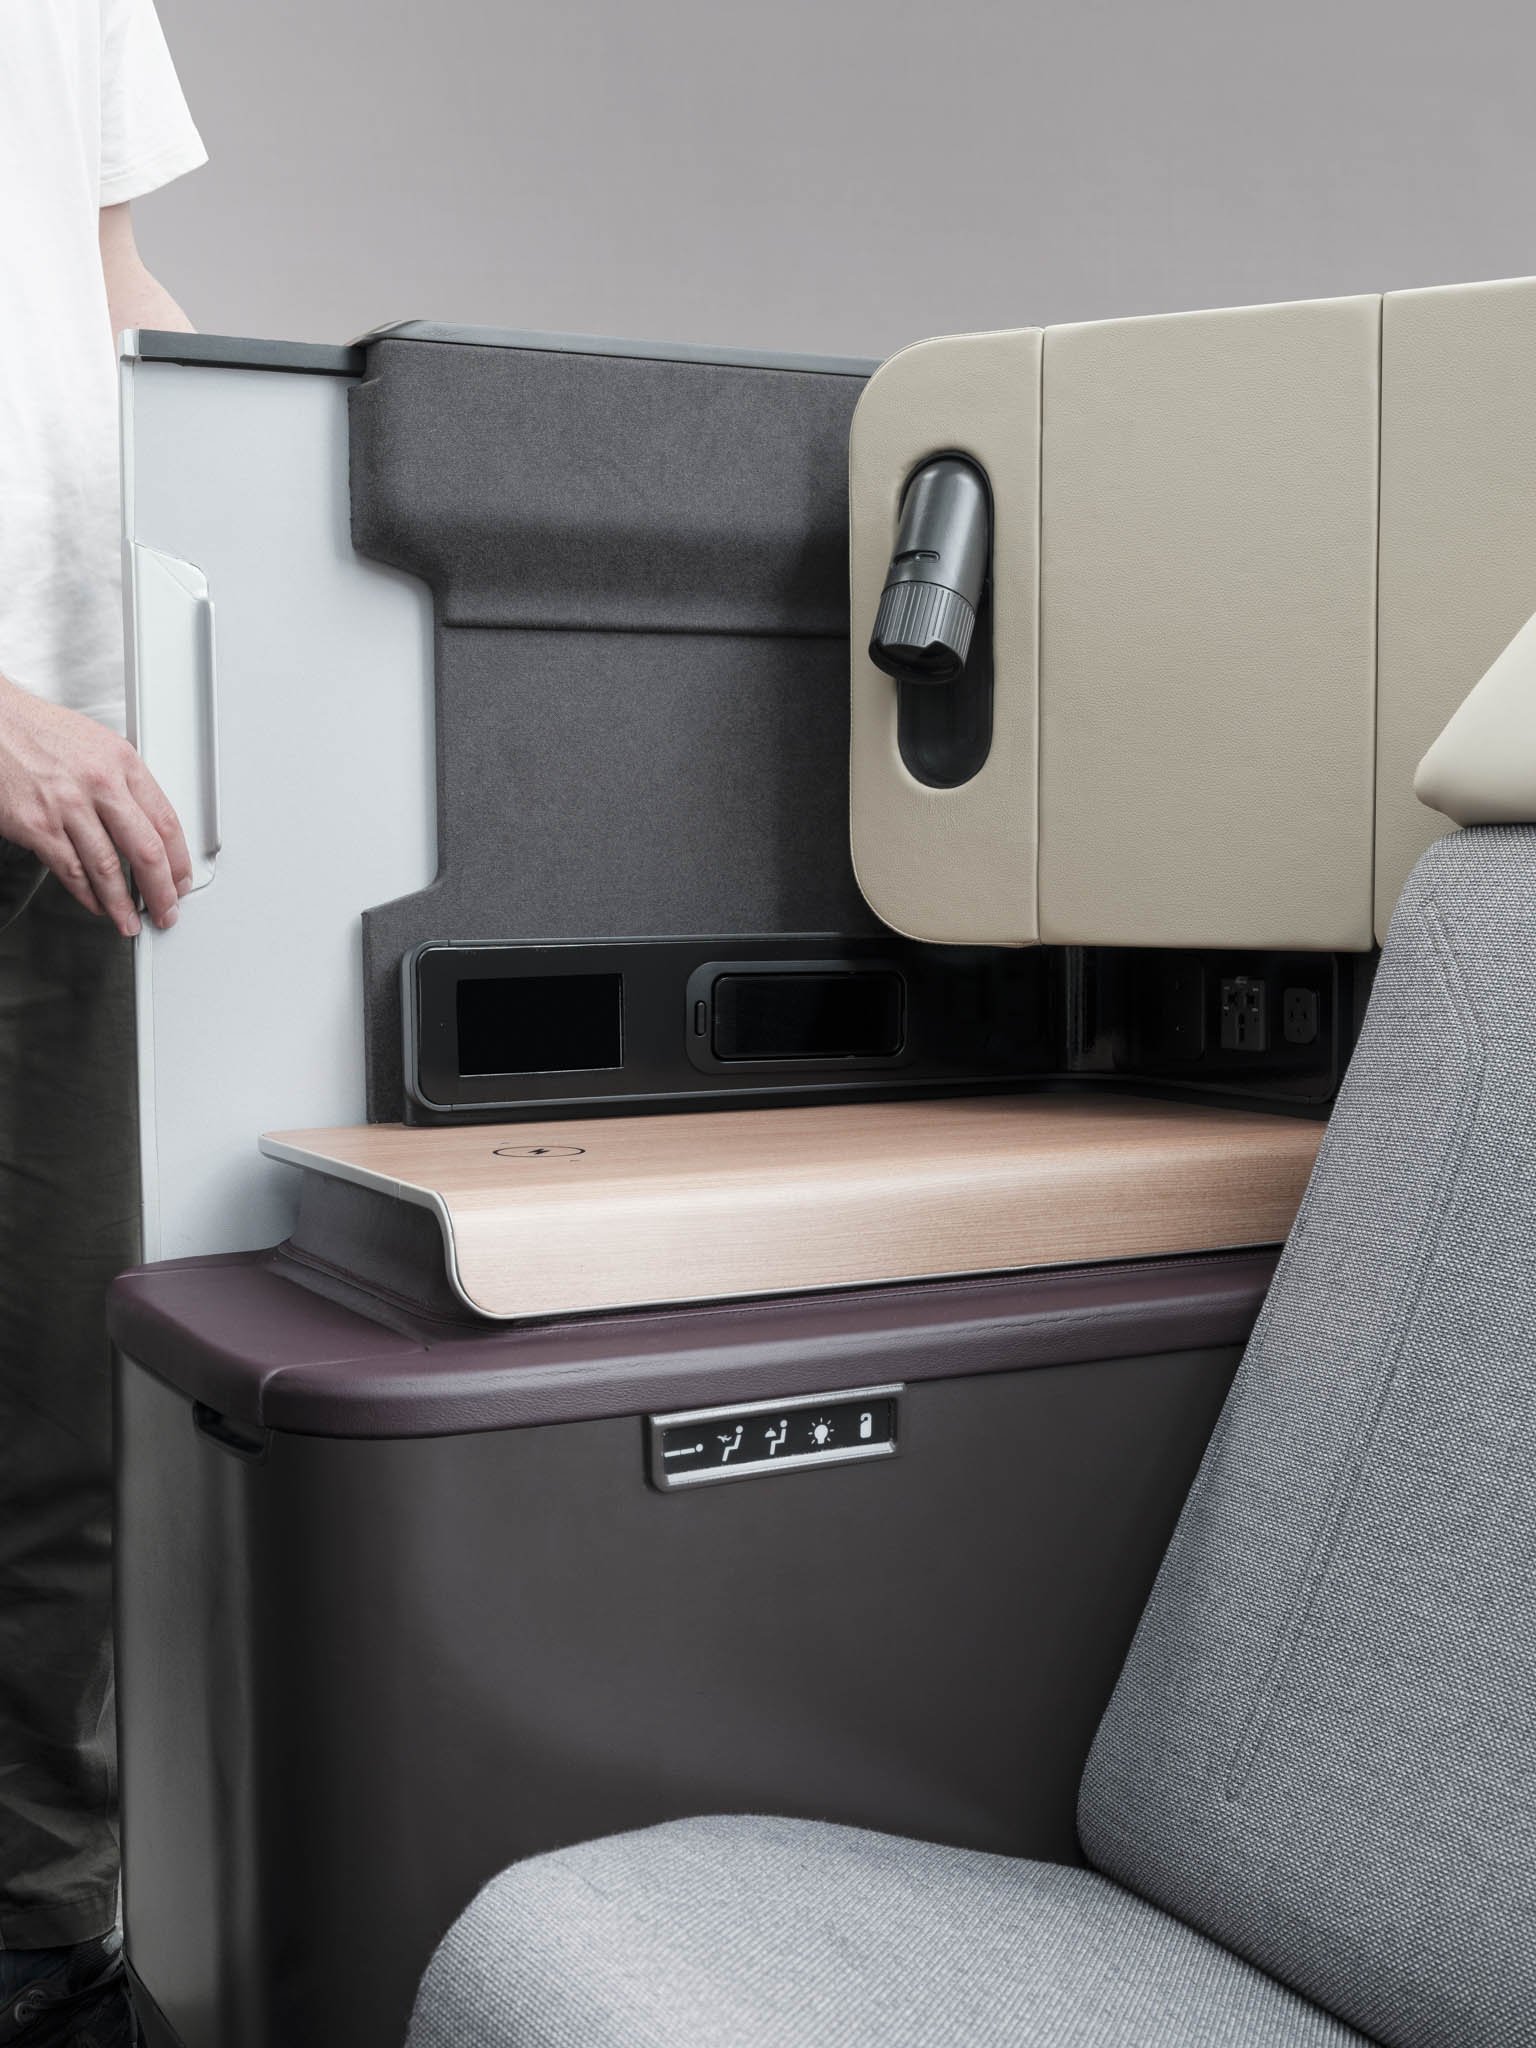 Qantas A350 Business Class Seat by Caon Studio